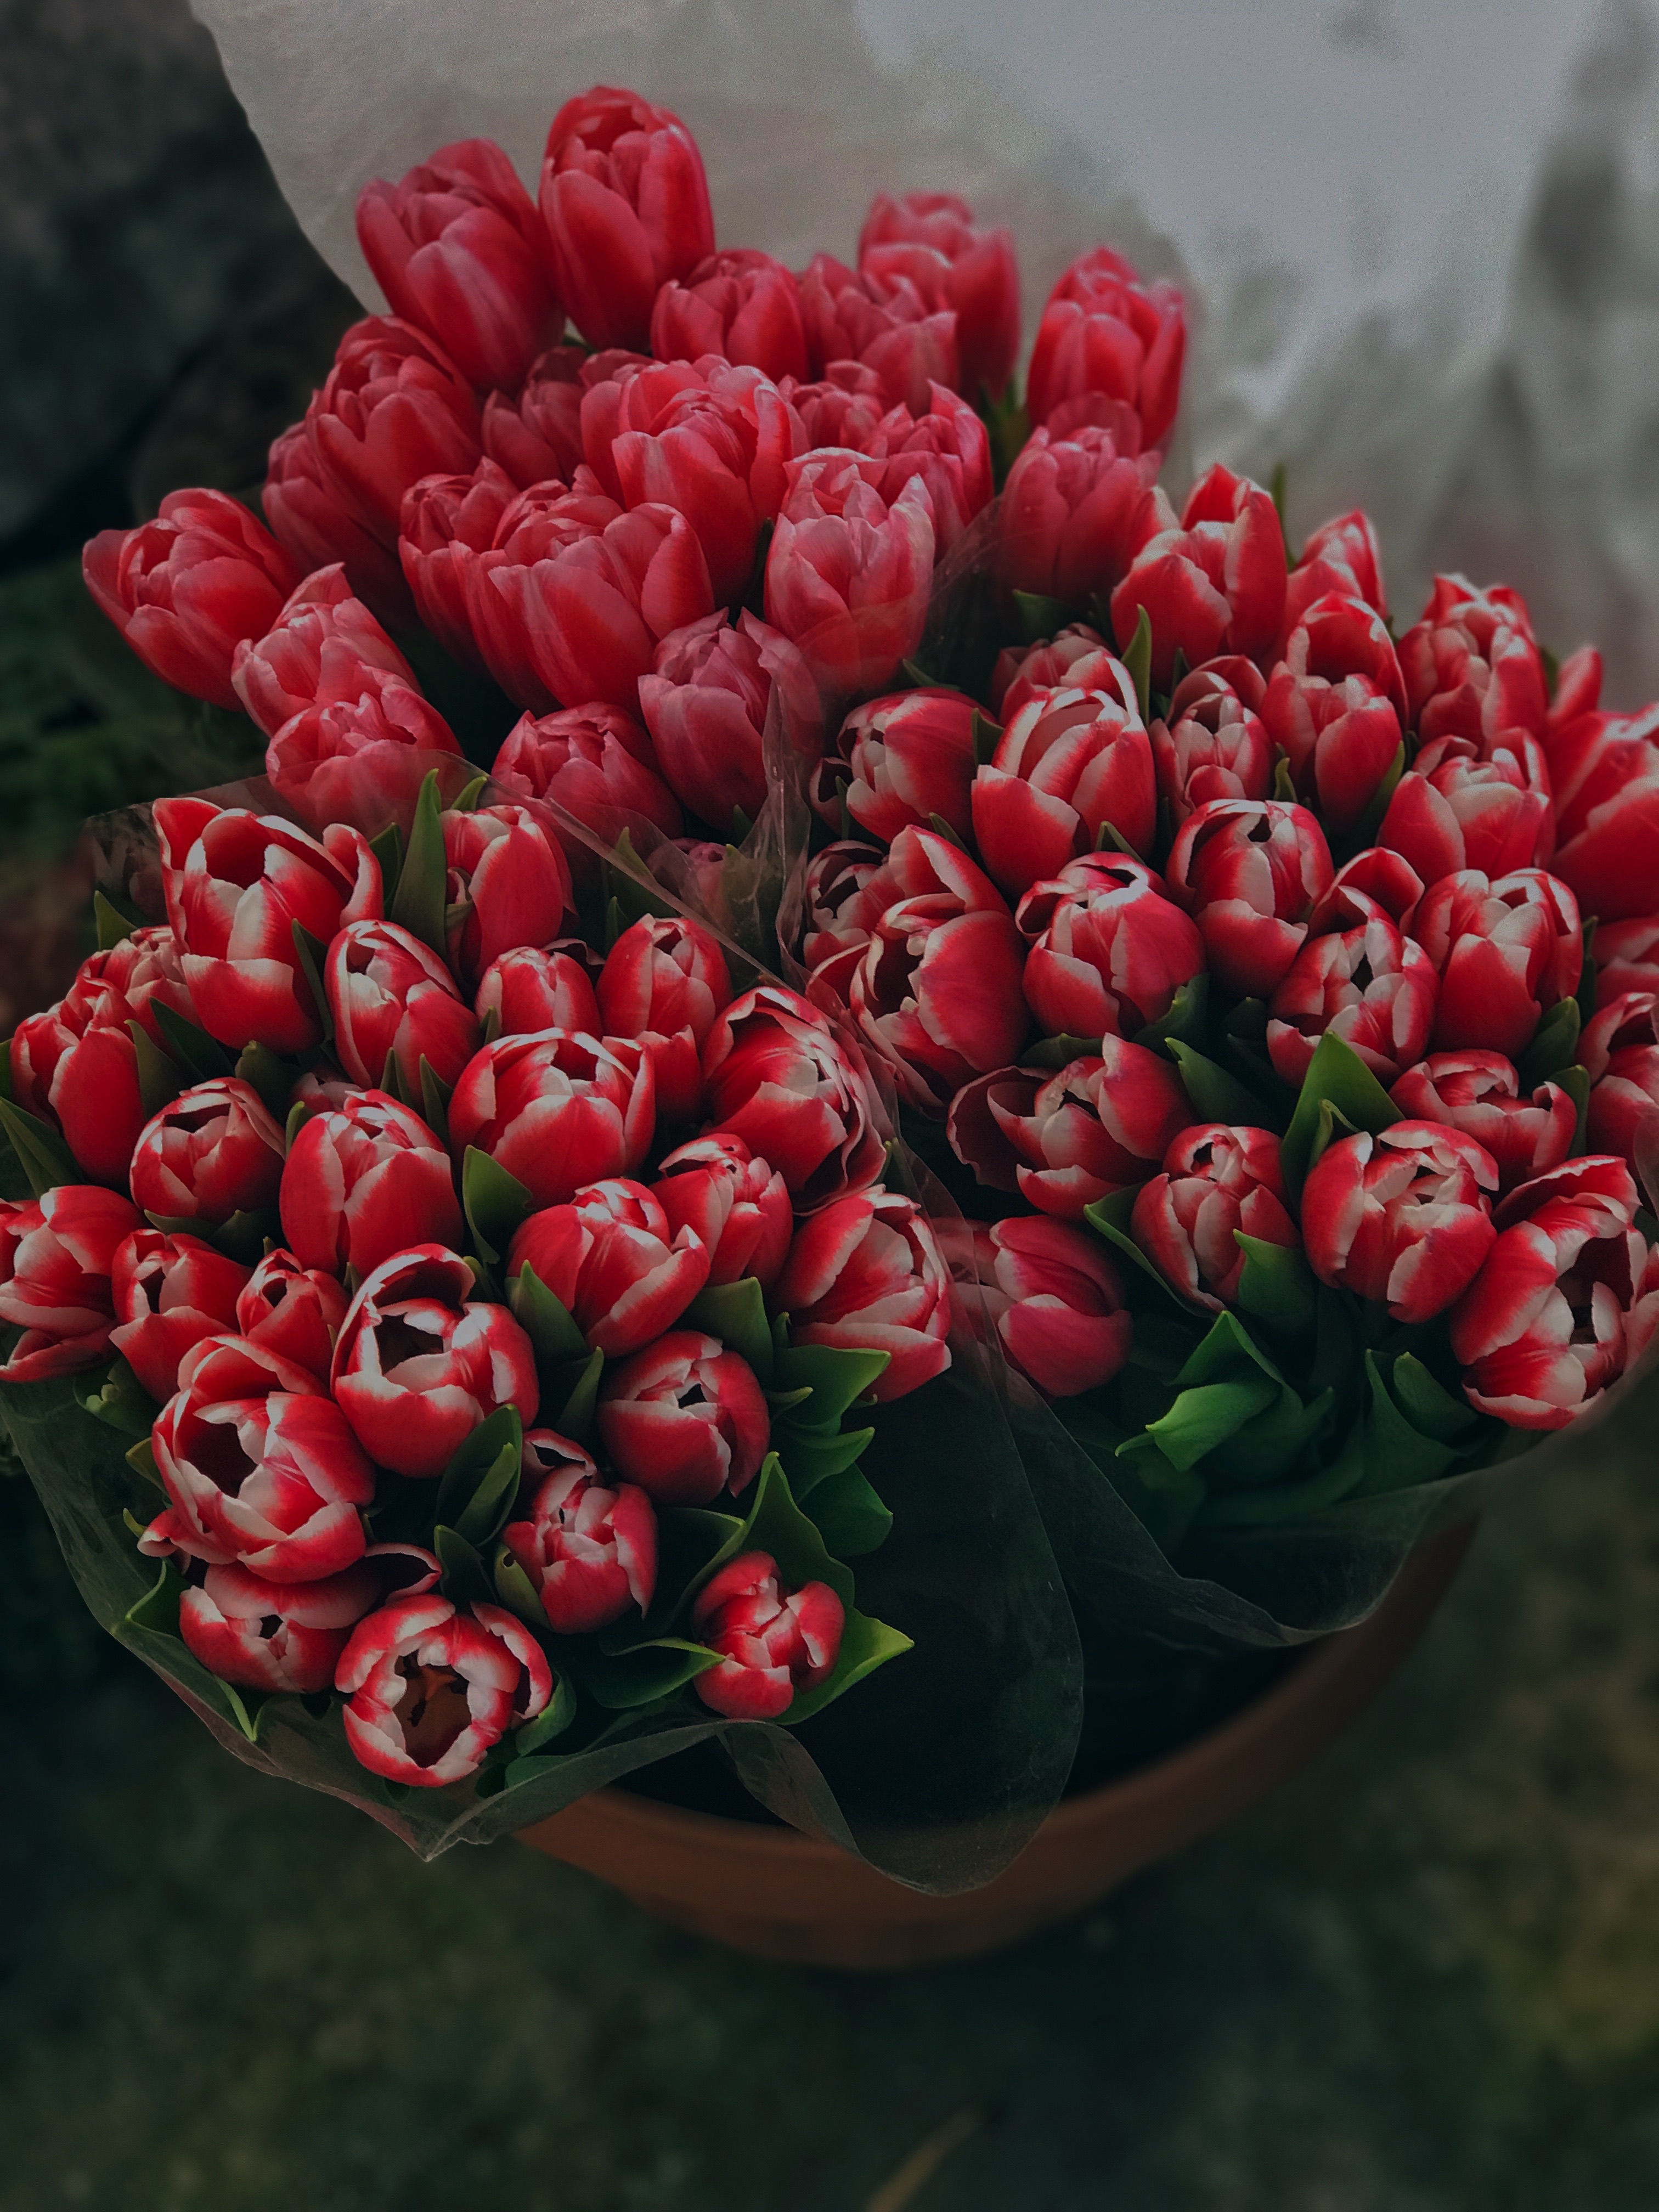 Red Tulips on a Pot